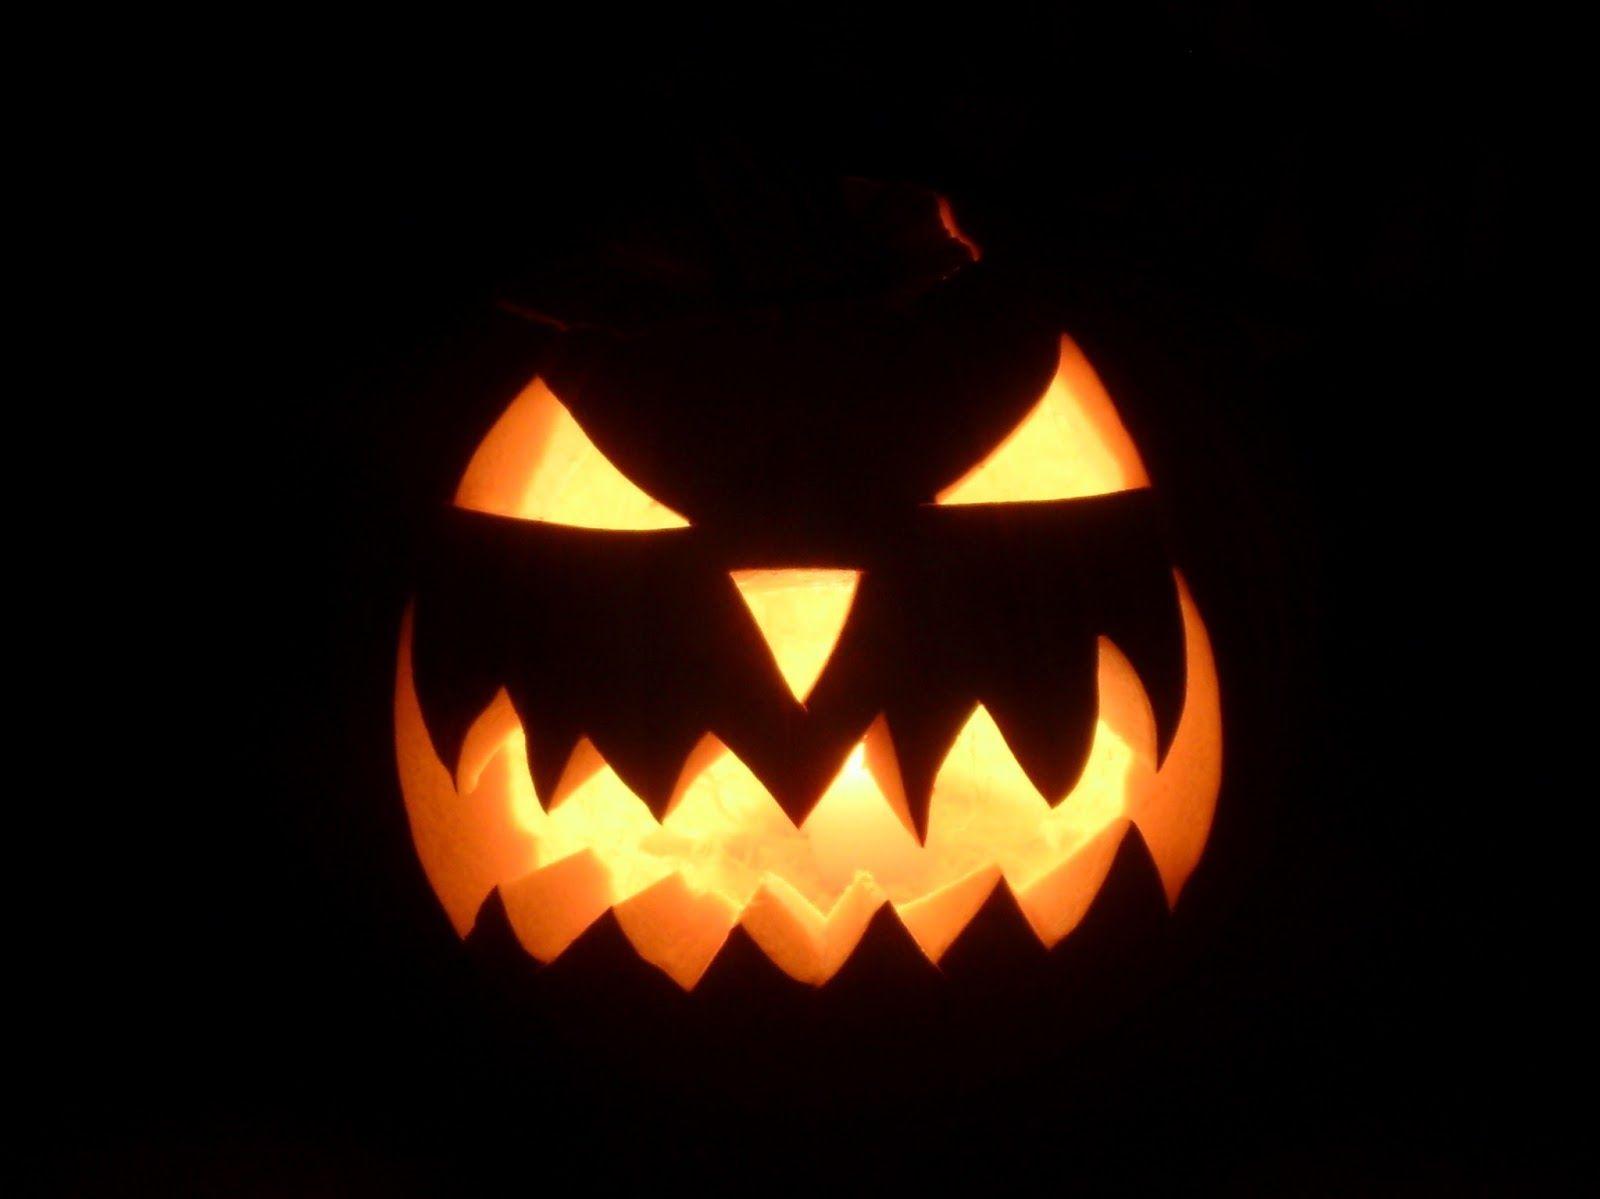 Simple Silly Scary Jack O Lantern Faces Image Picture Wallpaper